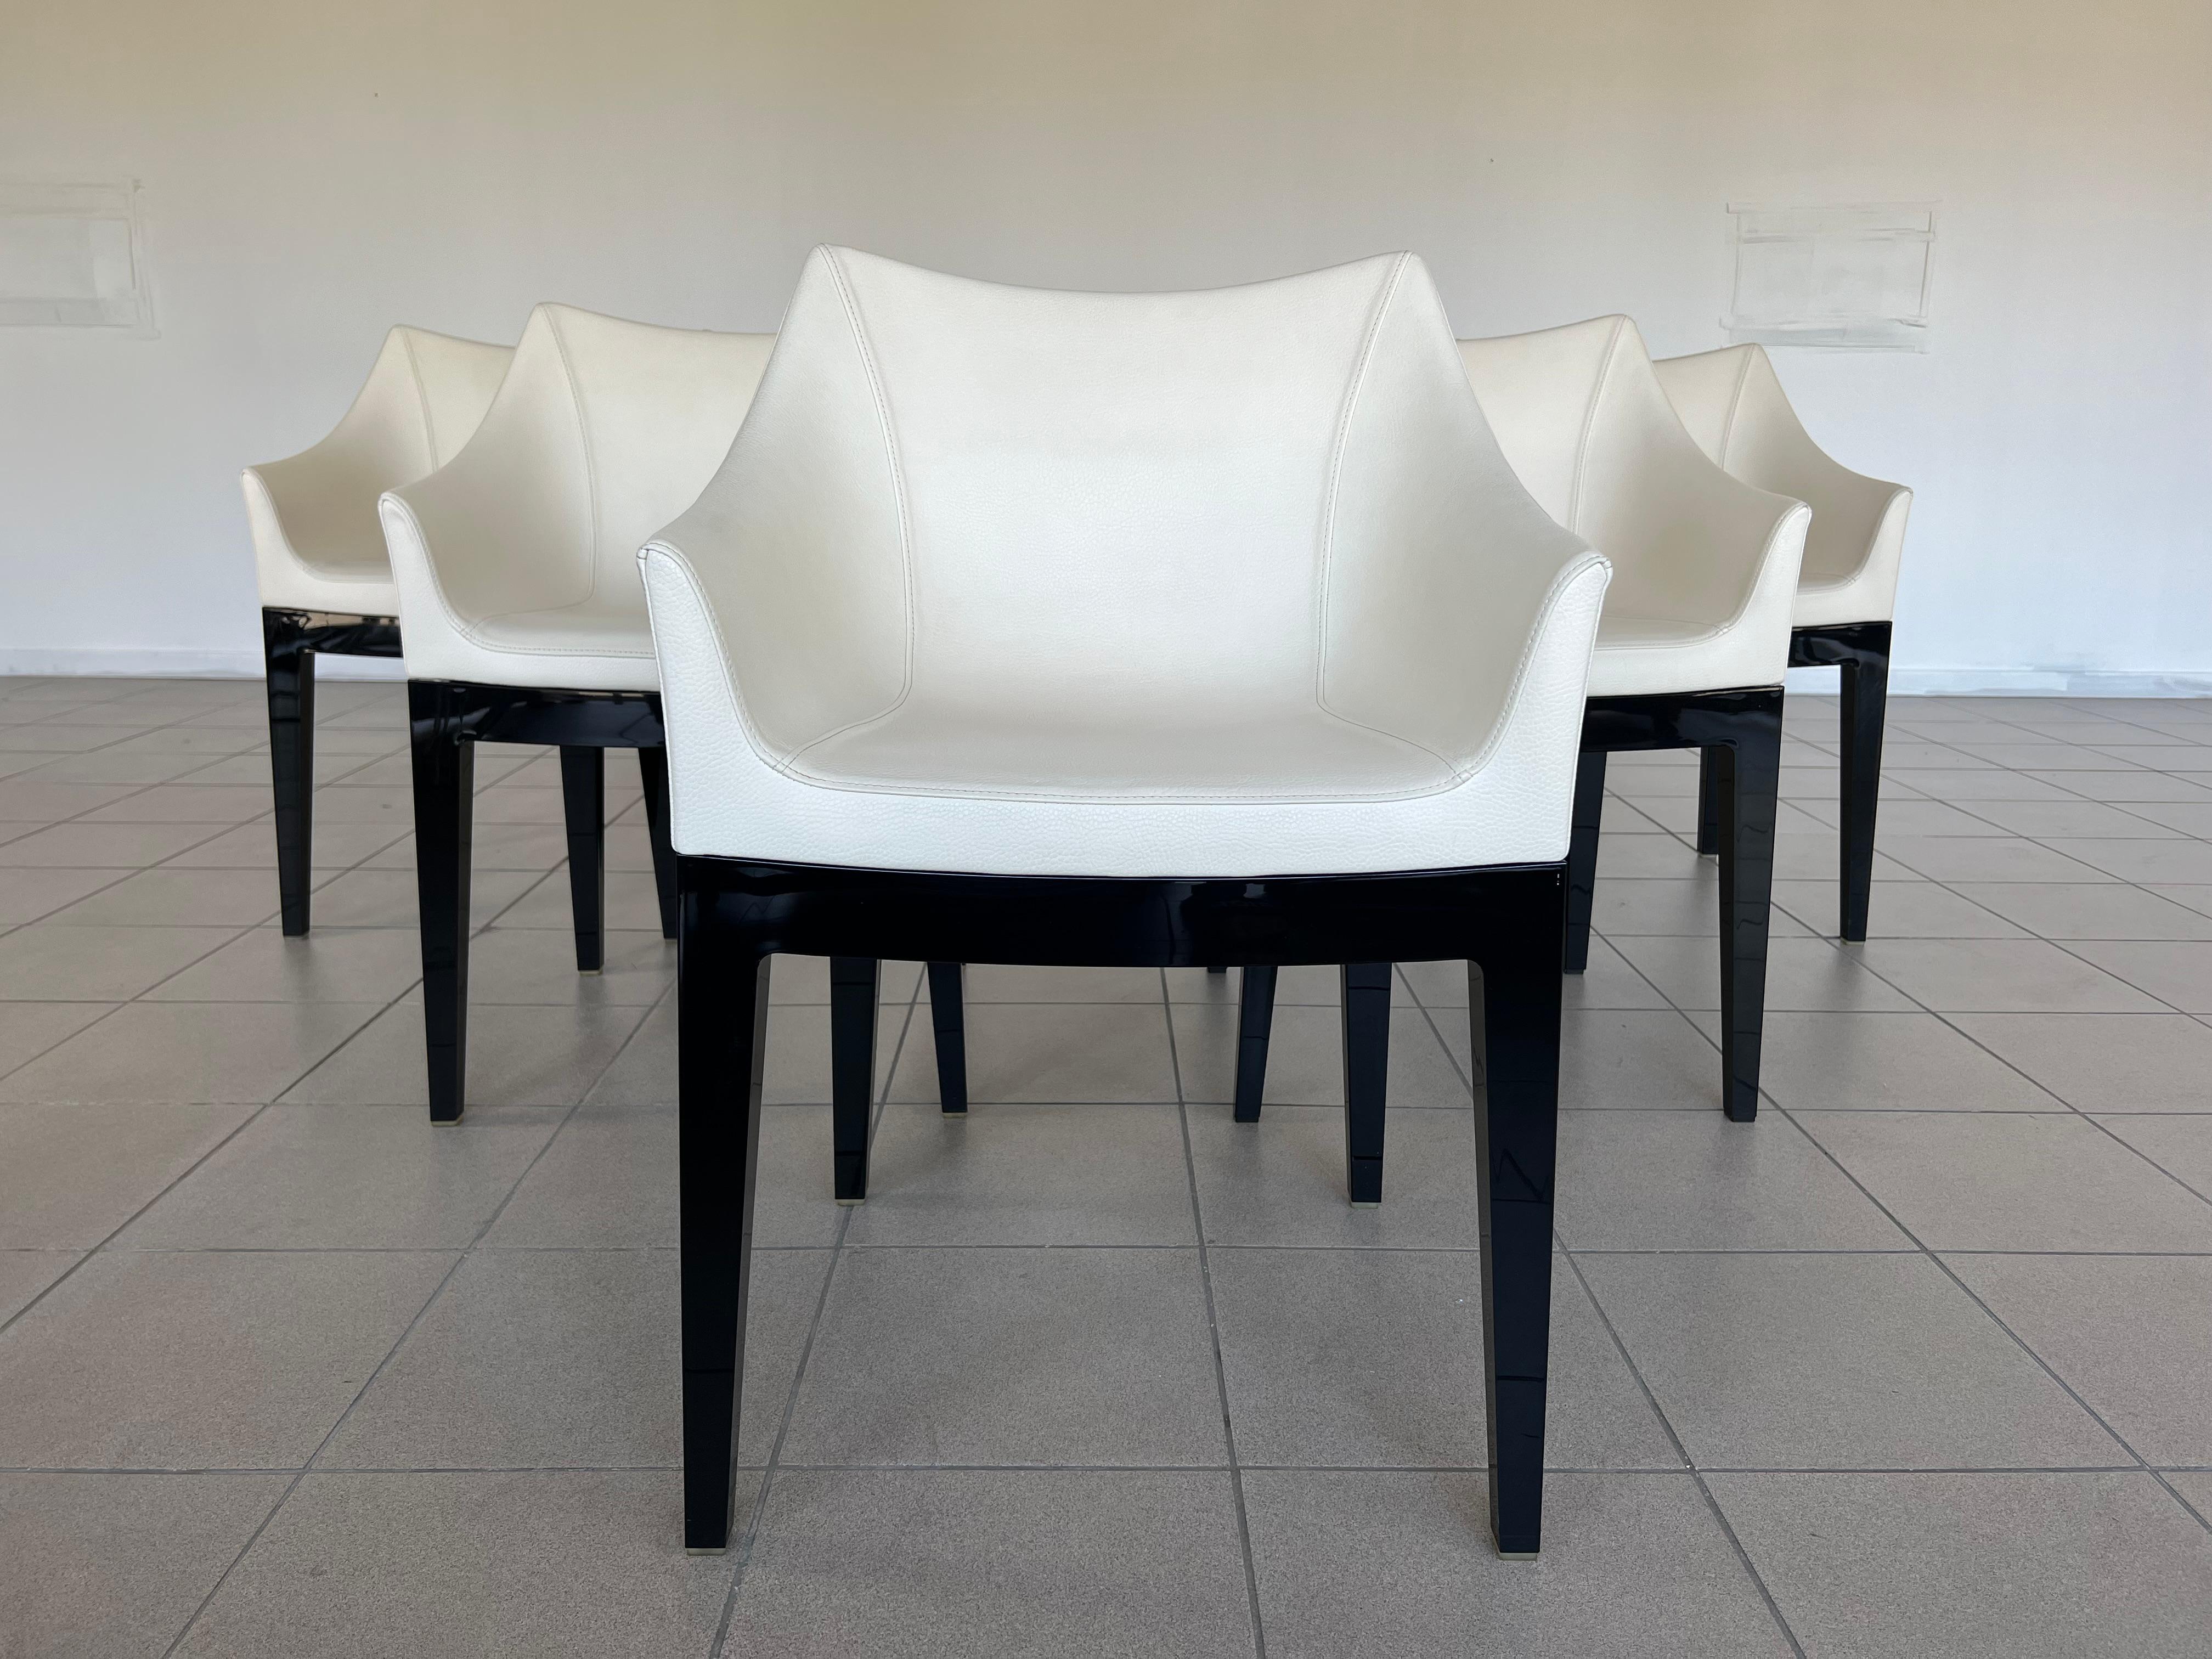 Original Mademoiselle Leather Chairs by Philippe Starck for Kartell - Set of 5 In Good Condition For Sale In Bridgeport, CT